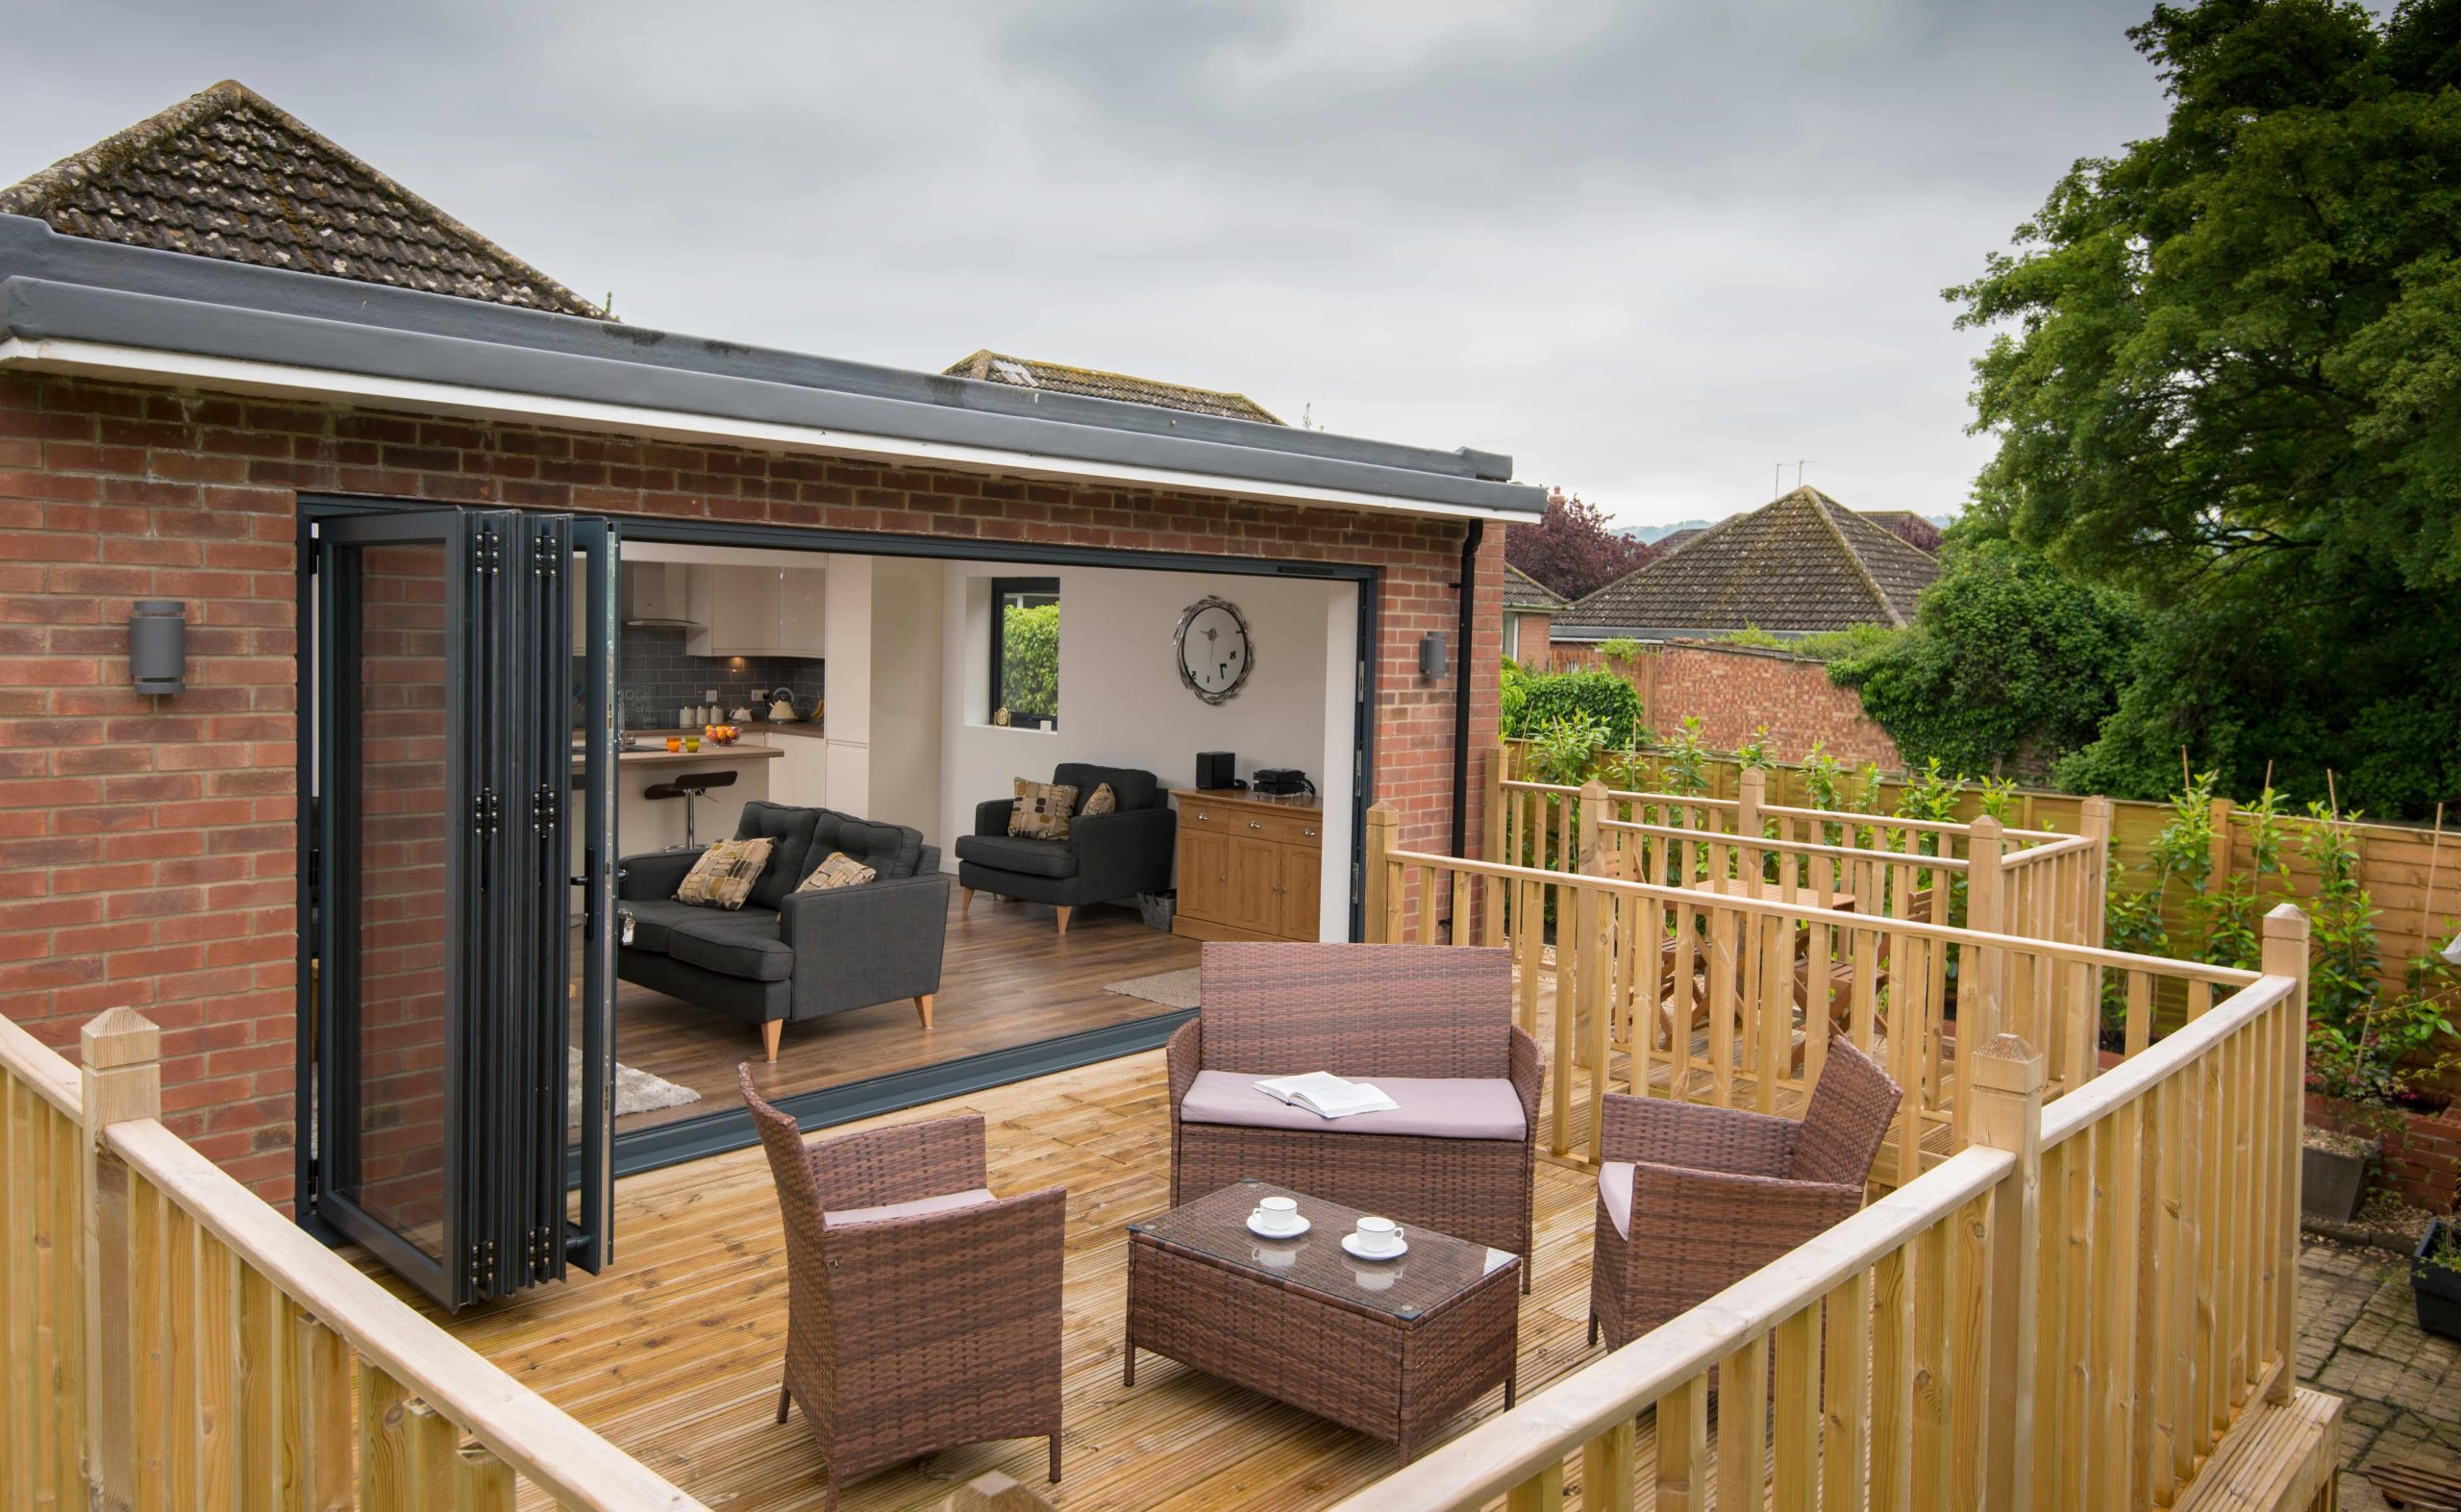 origin bifold doors leading out to decking with rattan chairs